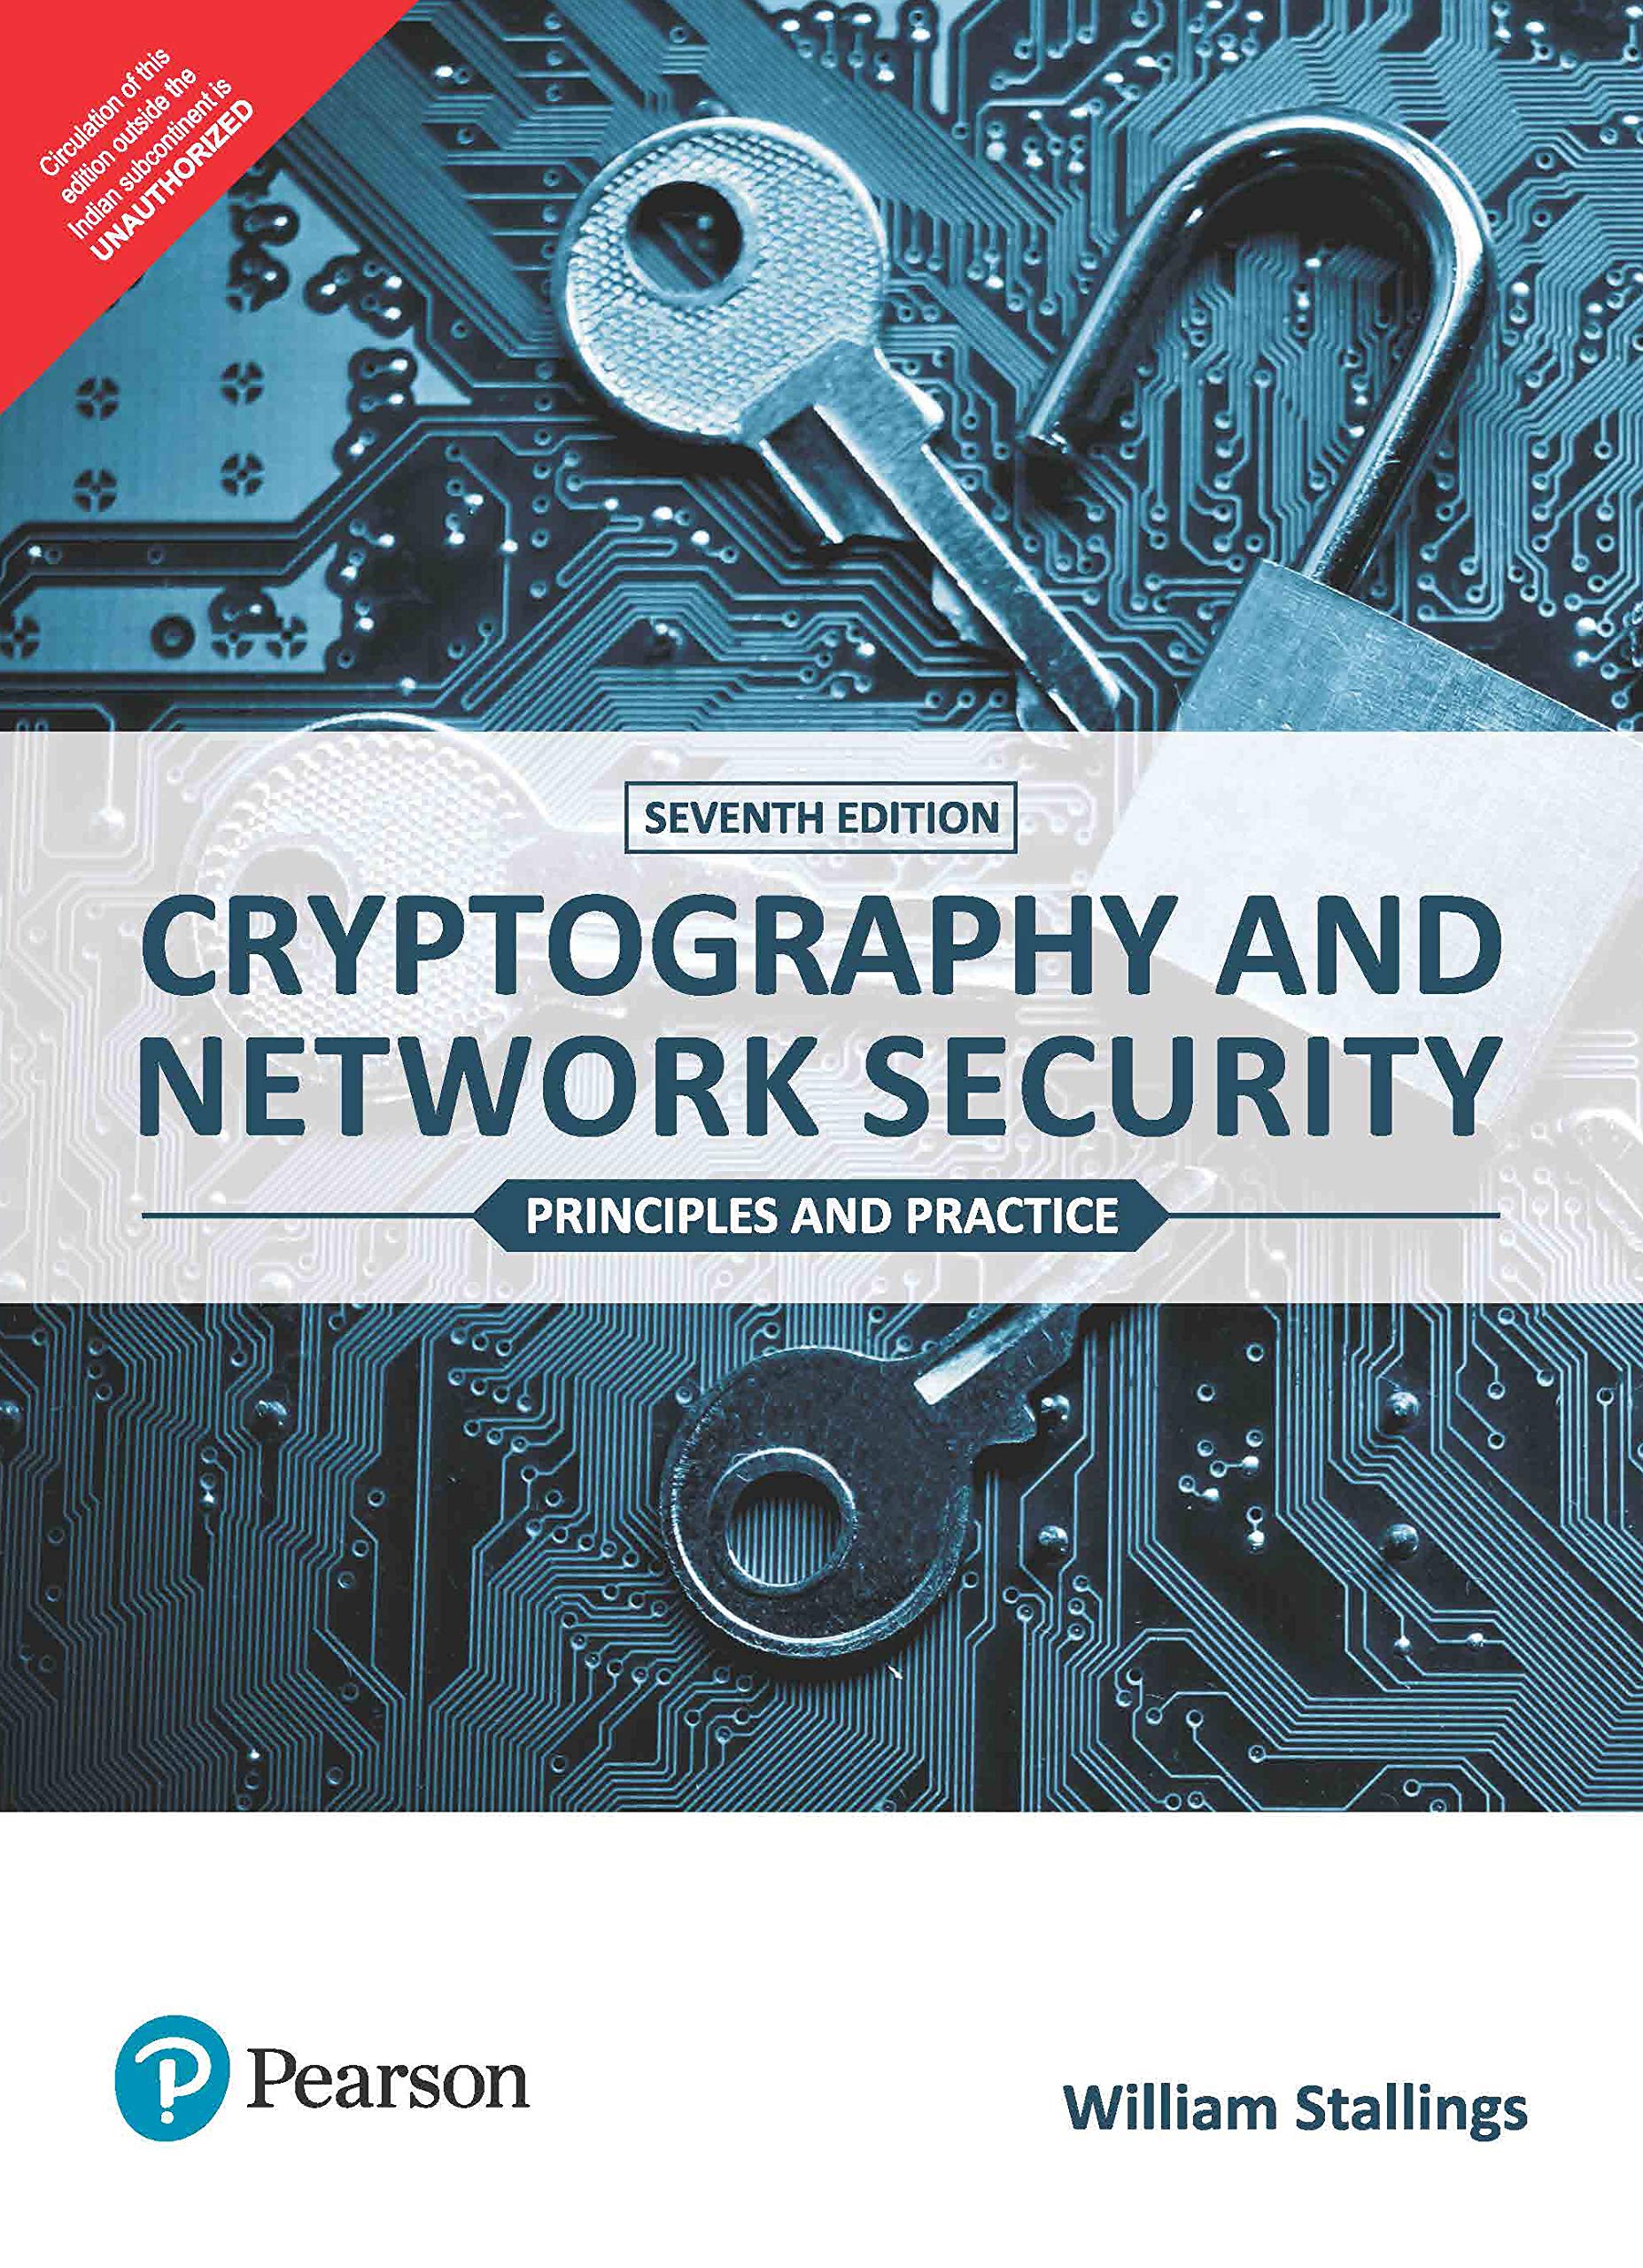 2022-23 III year/sem 2 Cryptography and Network Security Lab